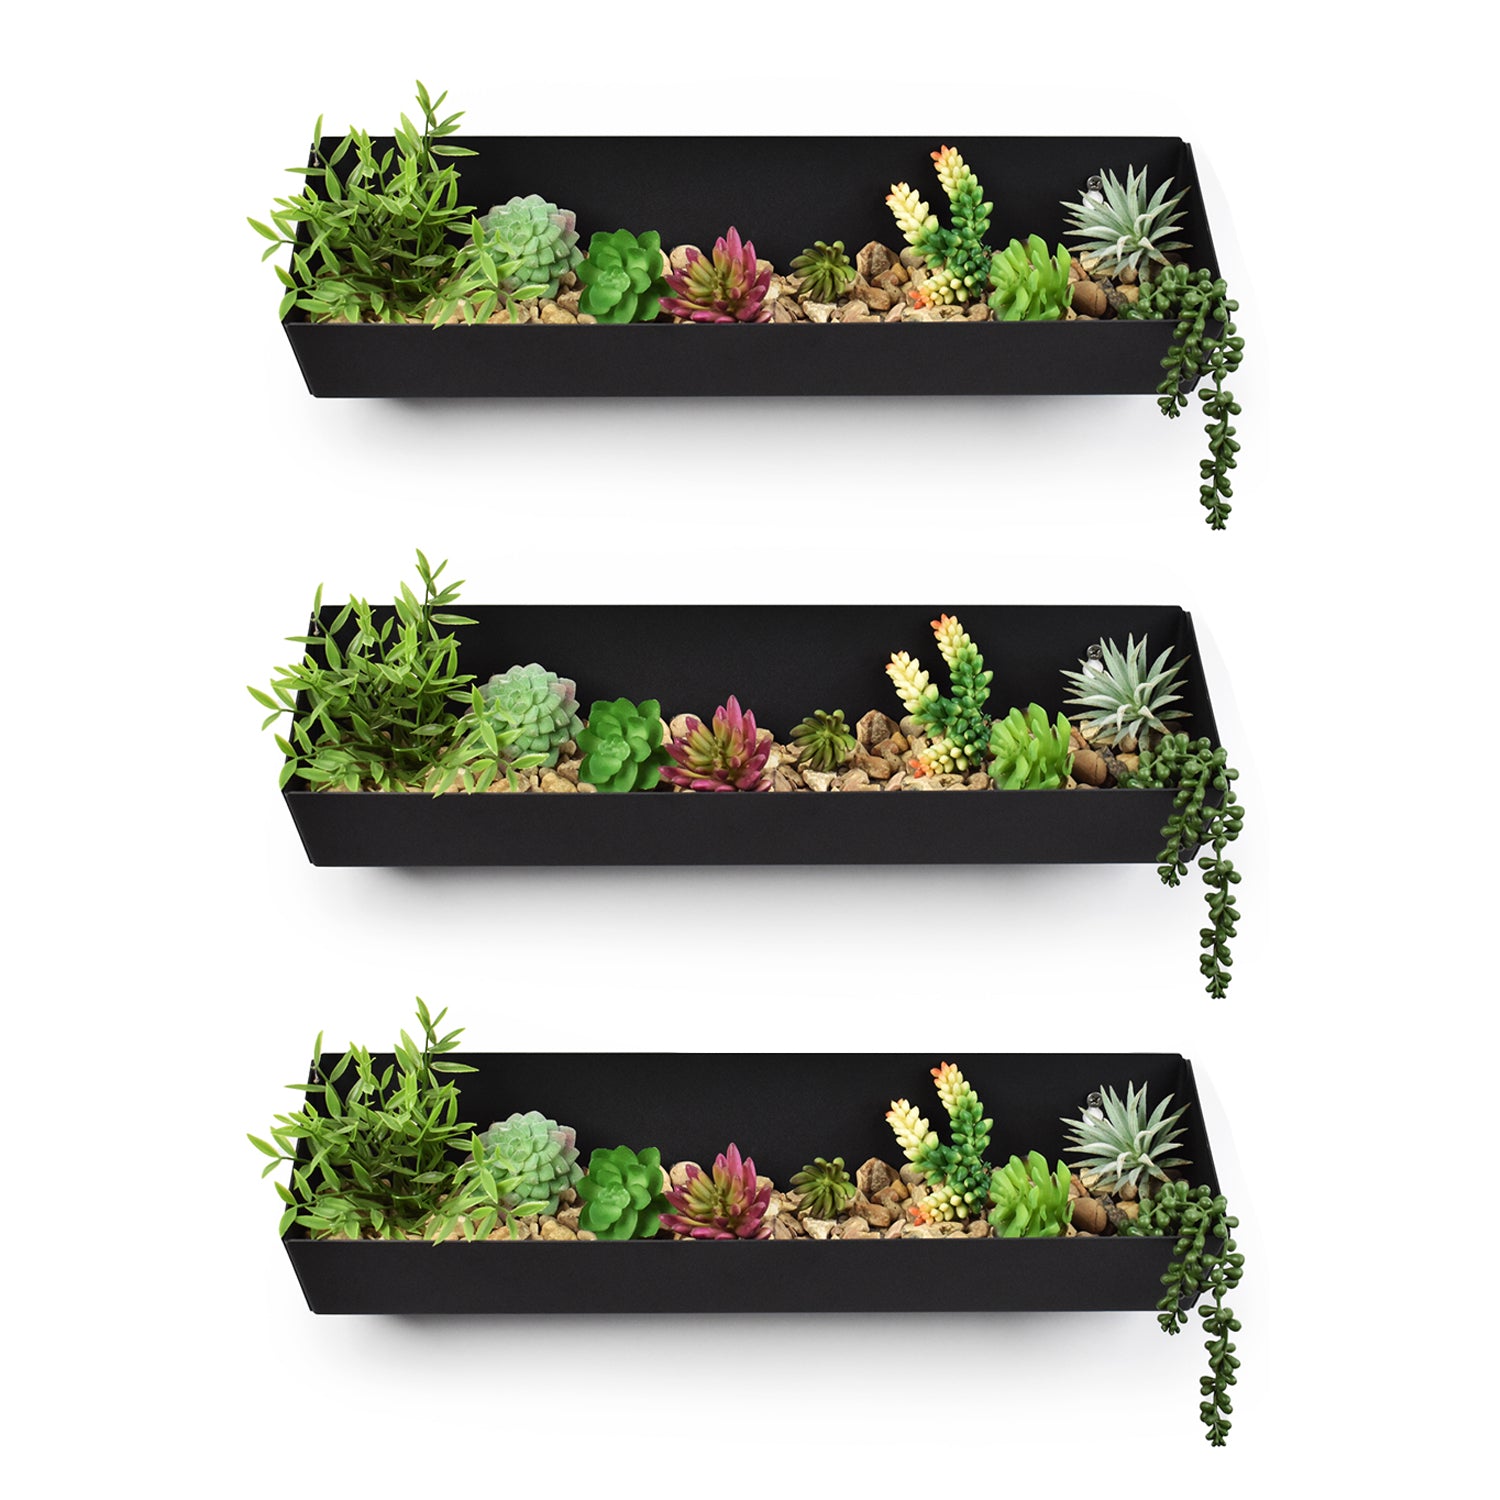 Wall Mount Planter - Angled View - British Steel - Made in UK